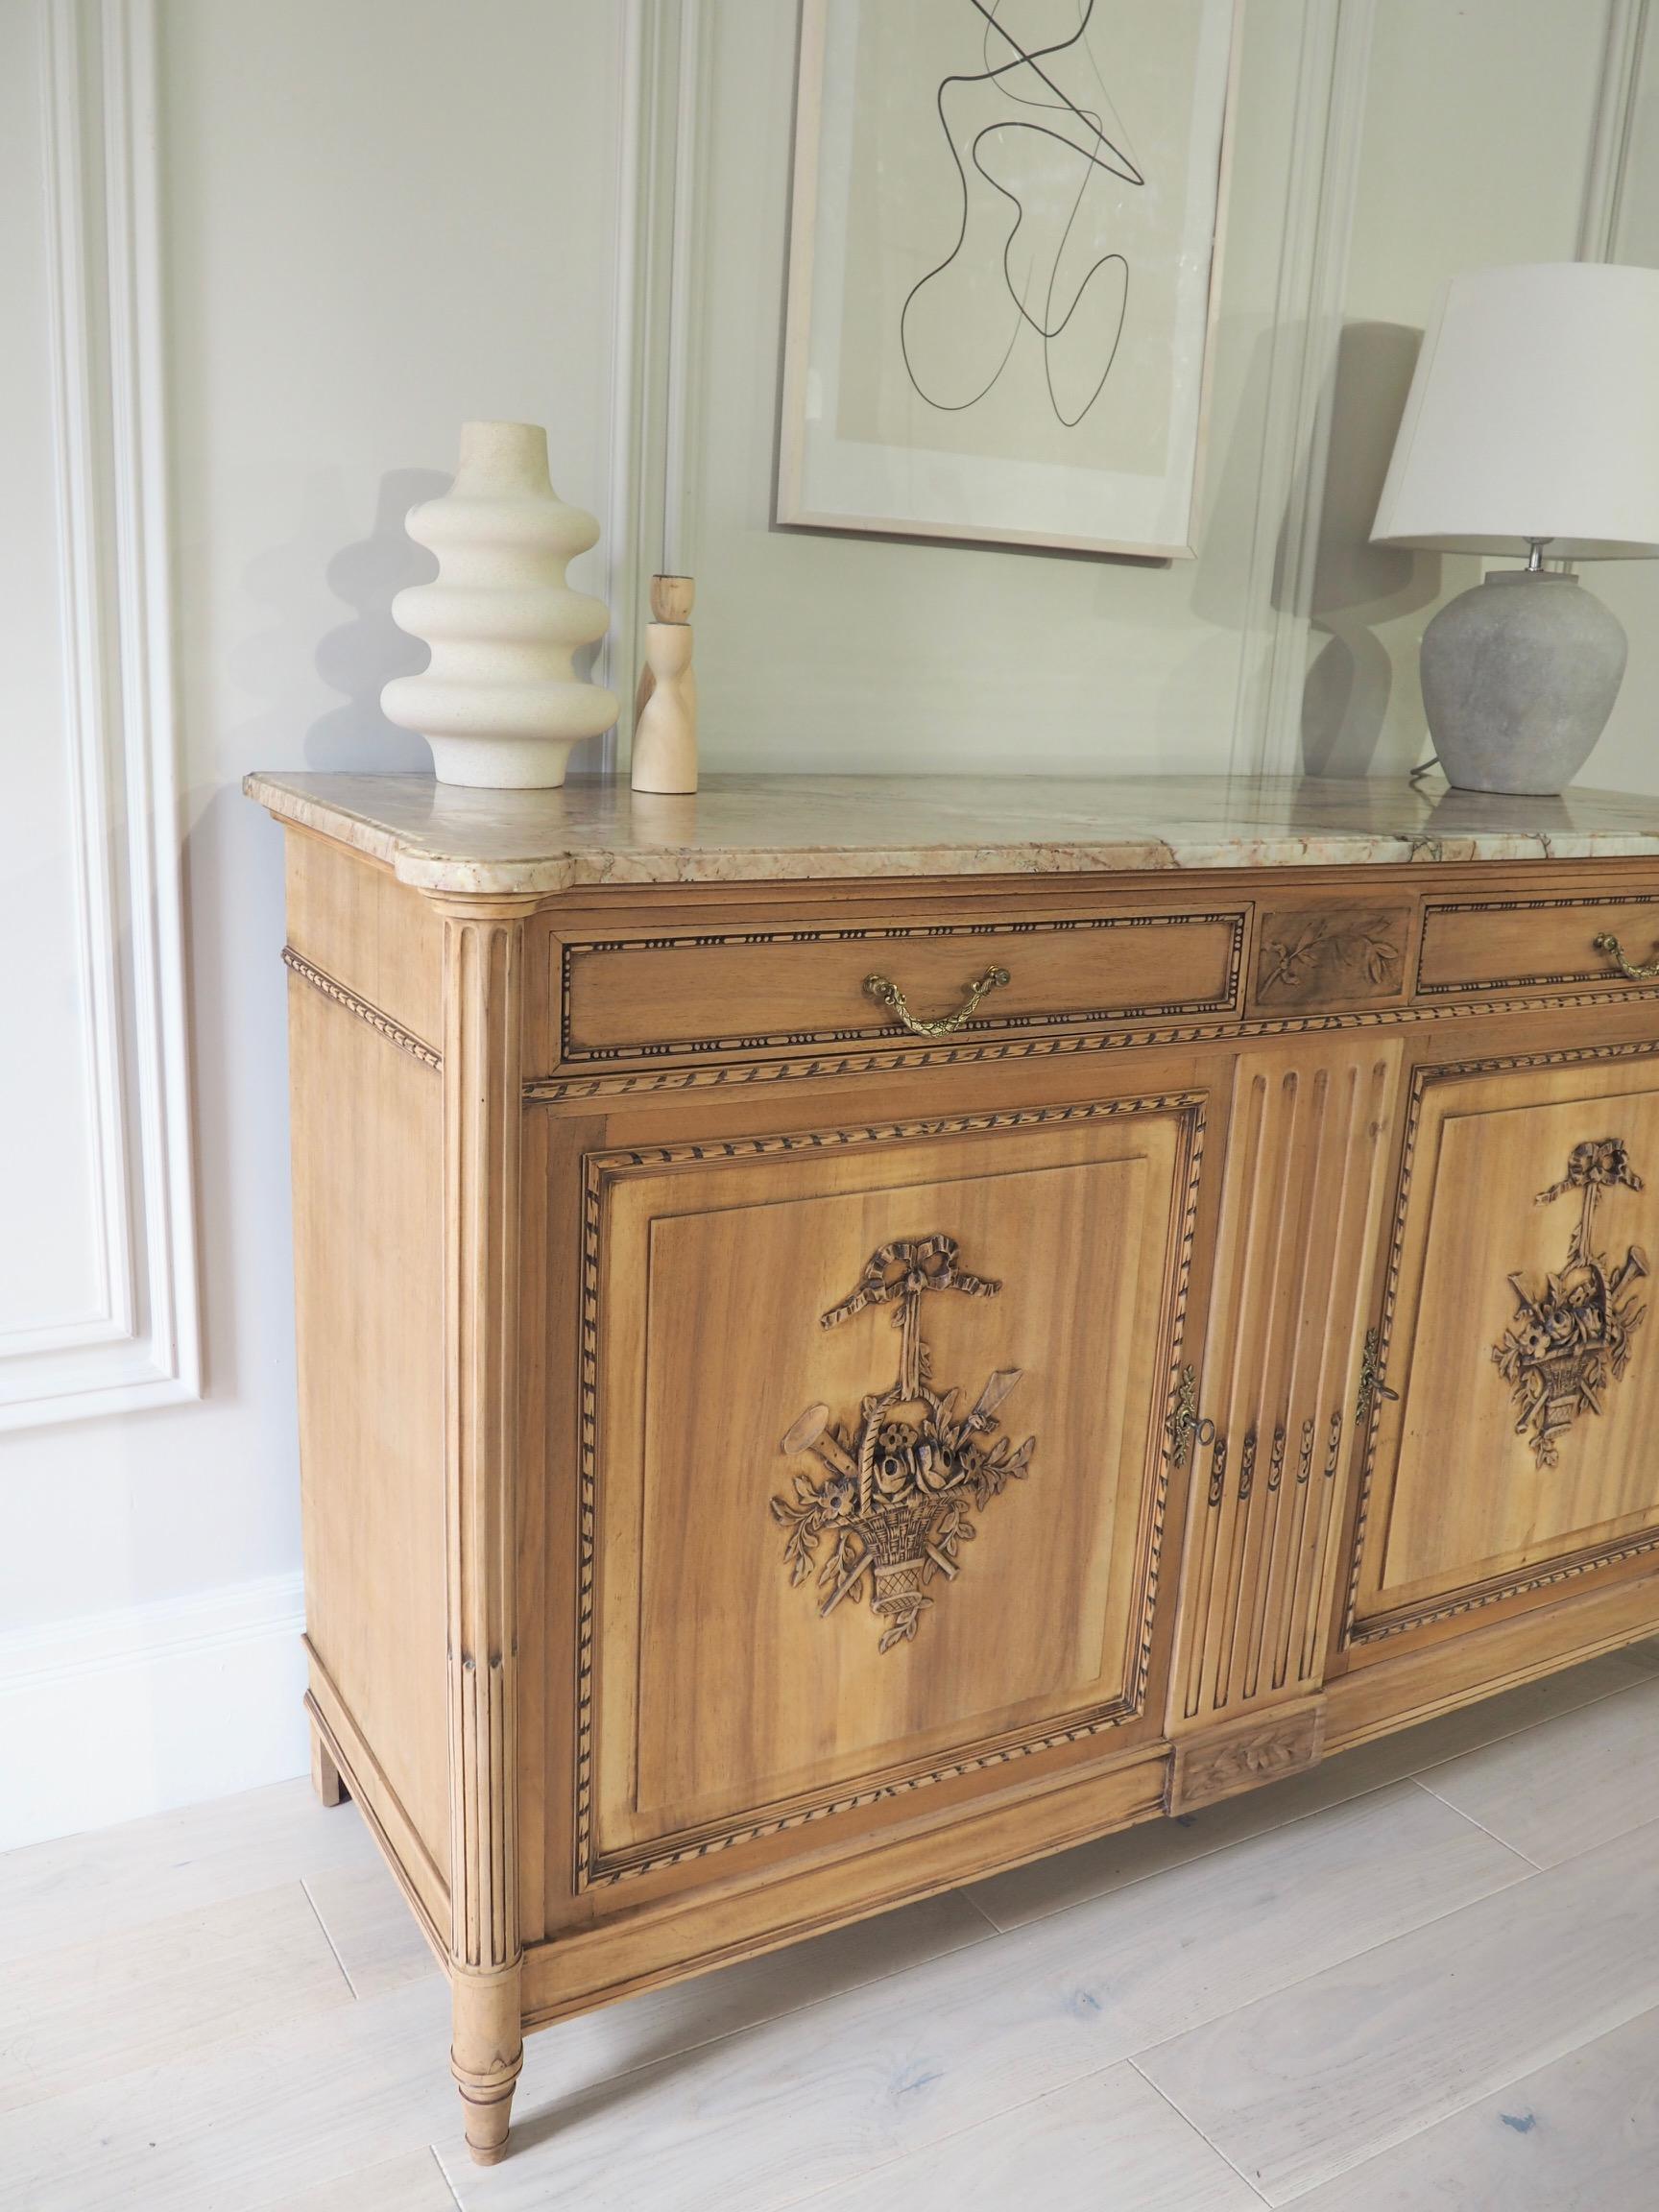 A stunning French antique sideboard in raw wood with a cream slab of marble sitting on top. 



It has been fully sanded back to reveal the beautiful wood grain; inside sits a wooden shelf and two upper drawers; all clean inside. The cupboard